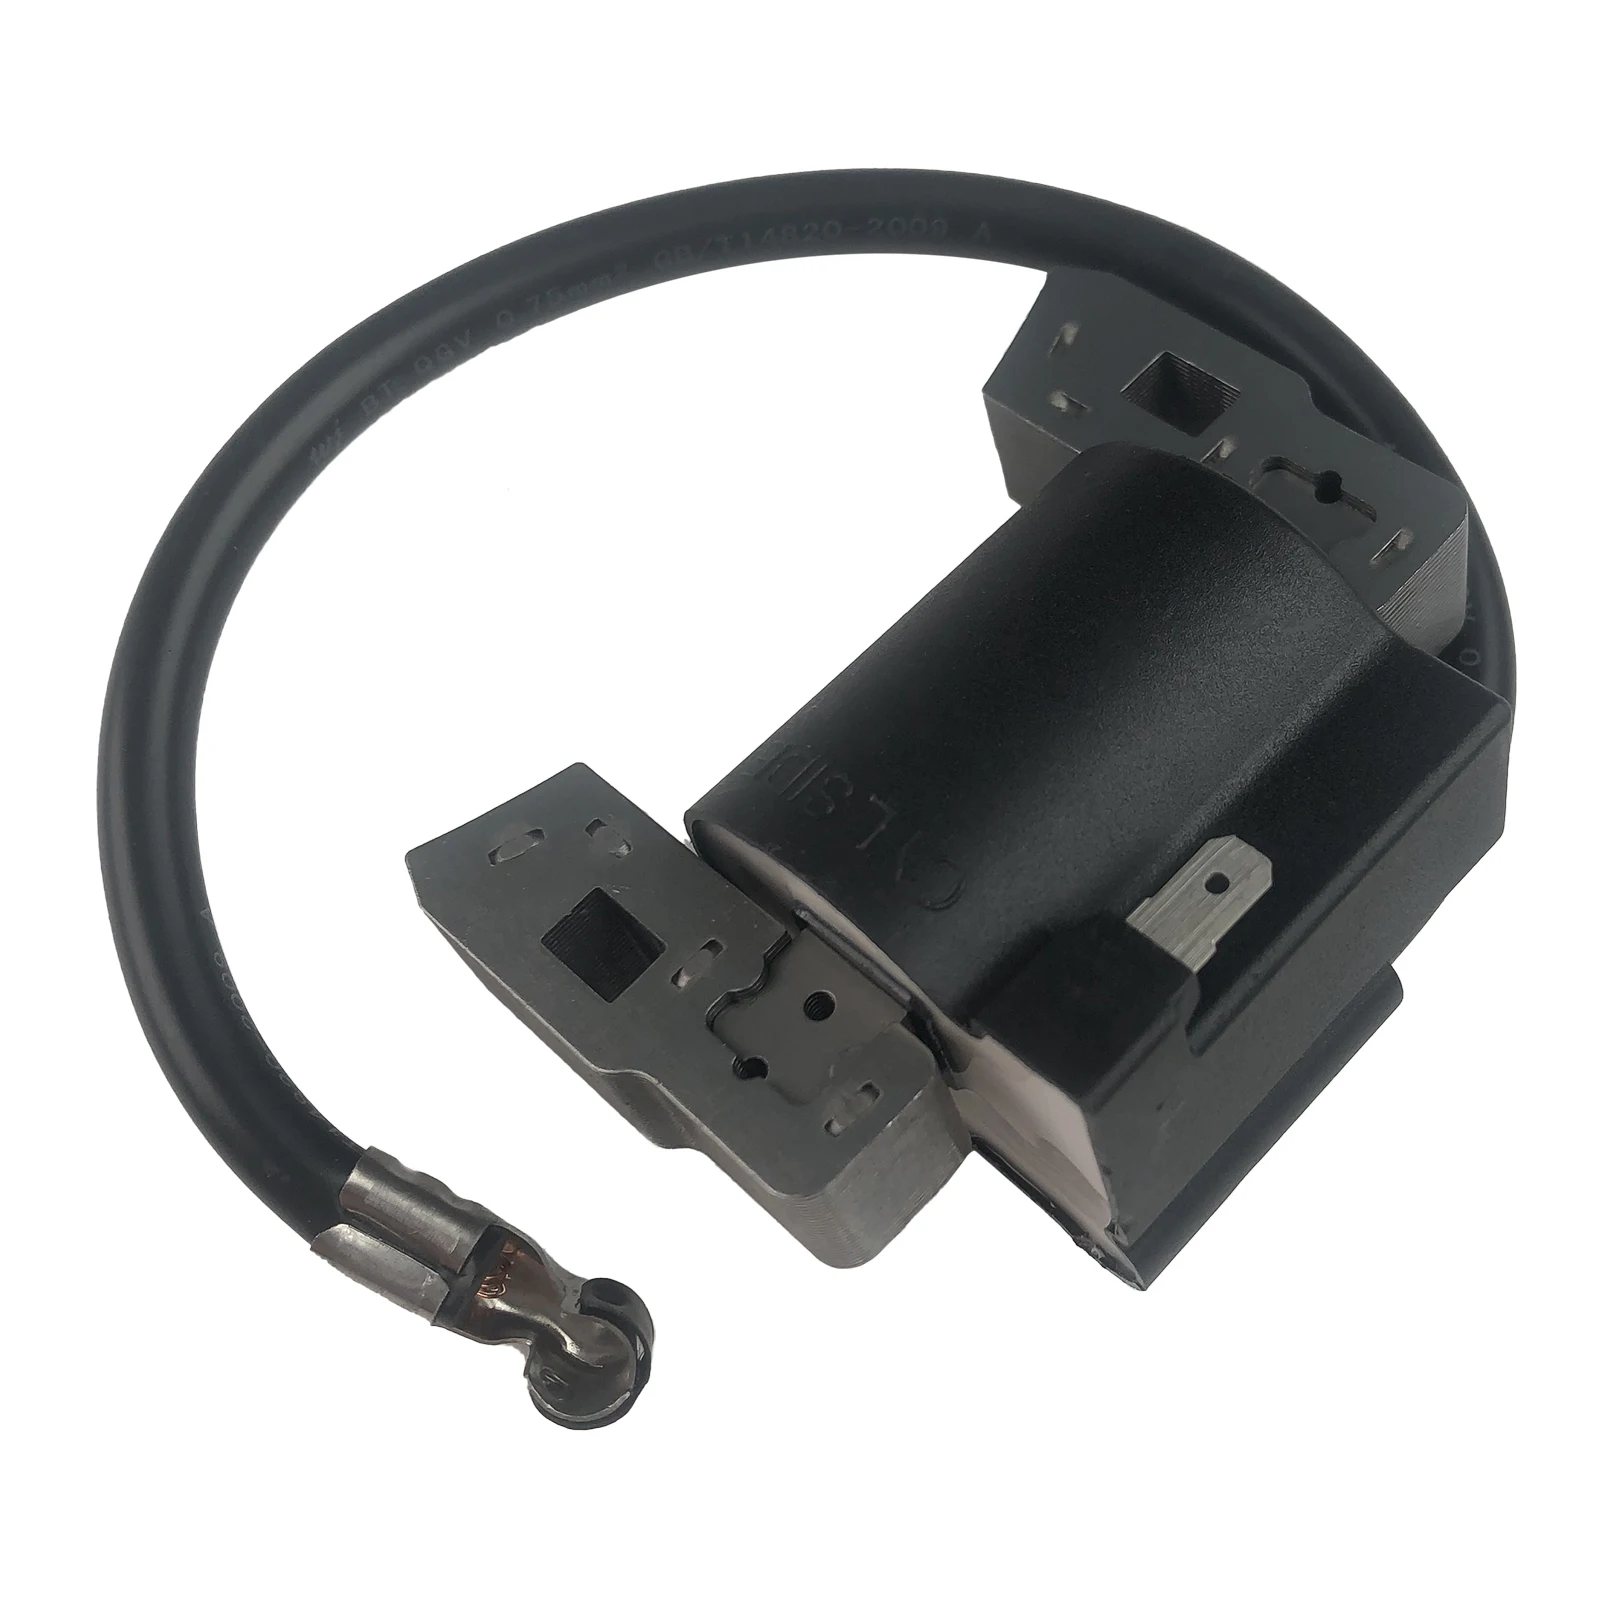 

1pc Ignition Coil replace Briggs & Stratton 5HP 395491 395490 397358 697037 298316 100201 133232 Arrowhead IBS3002 Stens 440-401